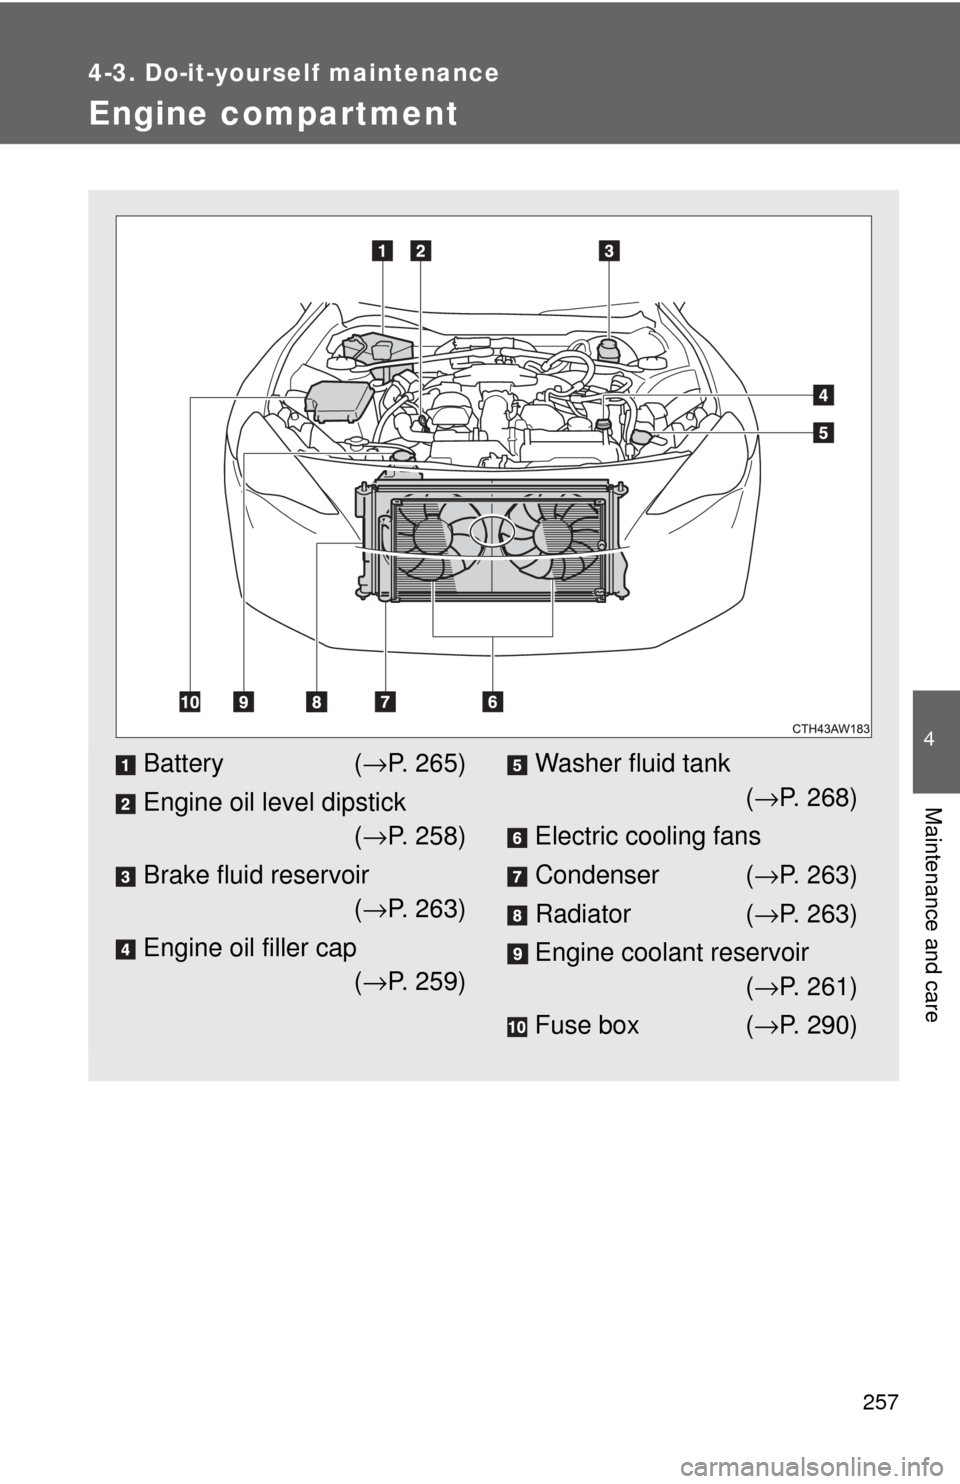 TOYOTA GT86 2017 1.G Owners Manual 257
4-3. Do-it-yourself maintenance
4
Maintenance and care
Engine compartment
Battery(→ P. 265)
Engine oil level dipstick (→ P. 258)
Brake fluid reservoir (→ P. 263)
Engine oil filler cap (→ P